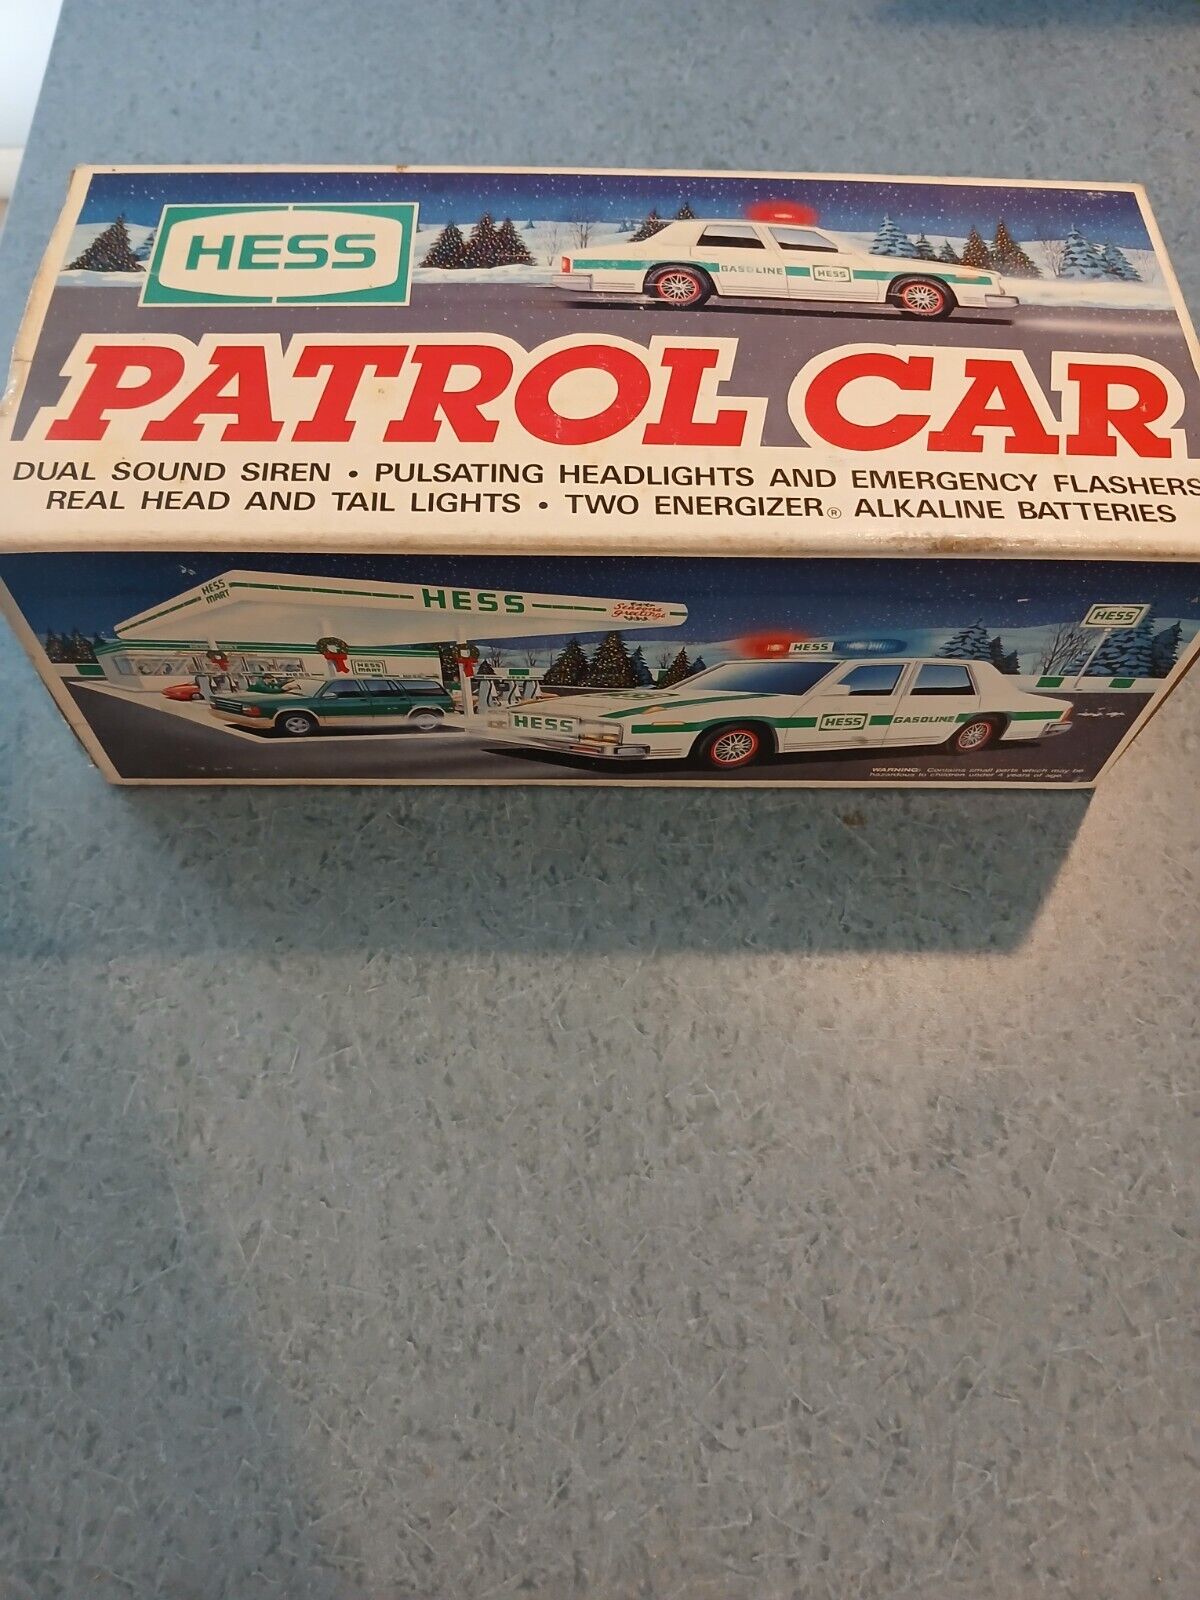 1993 Hess Patrol Car In Original Box w/ Inserts Complete.  Lights And Sound Work